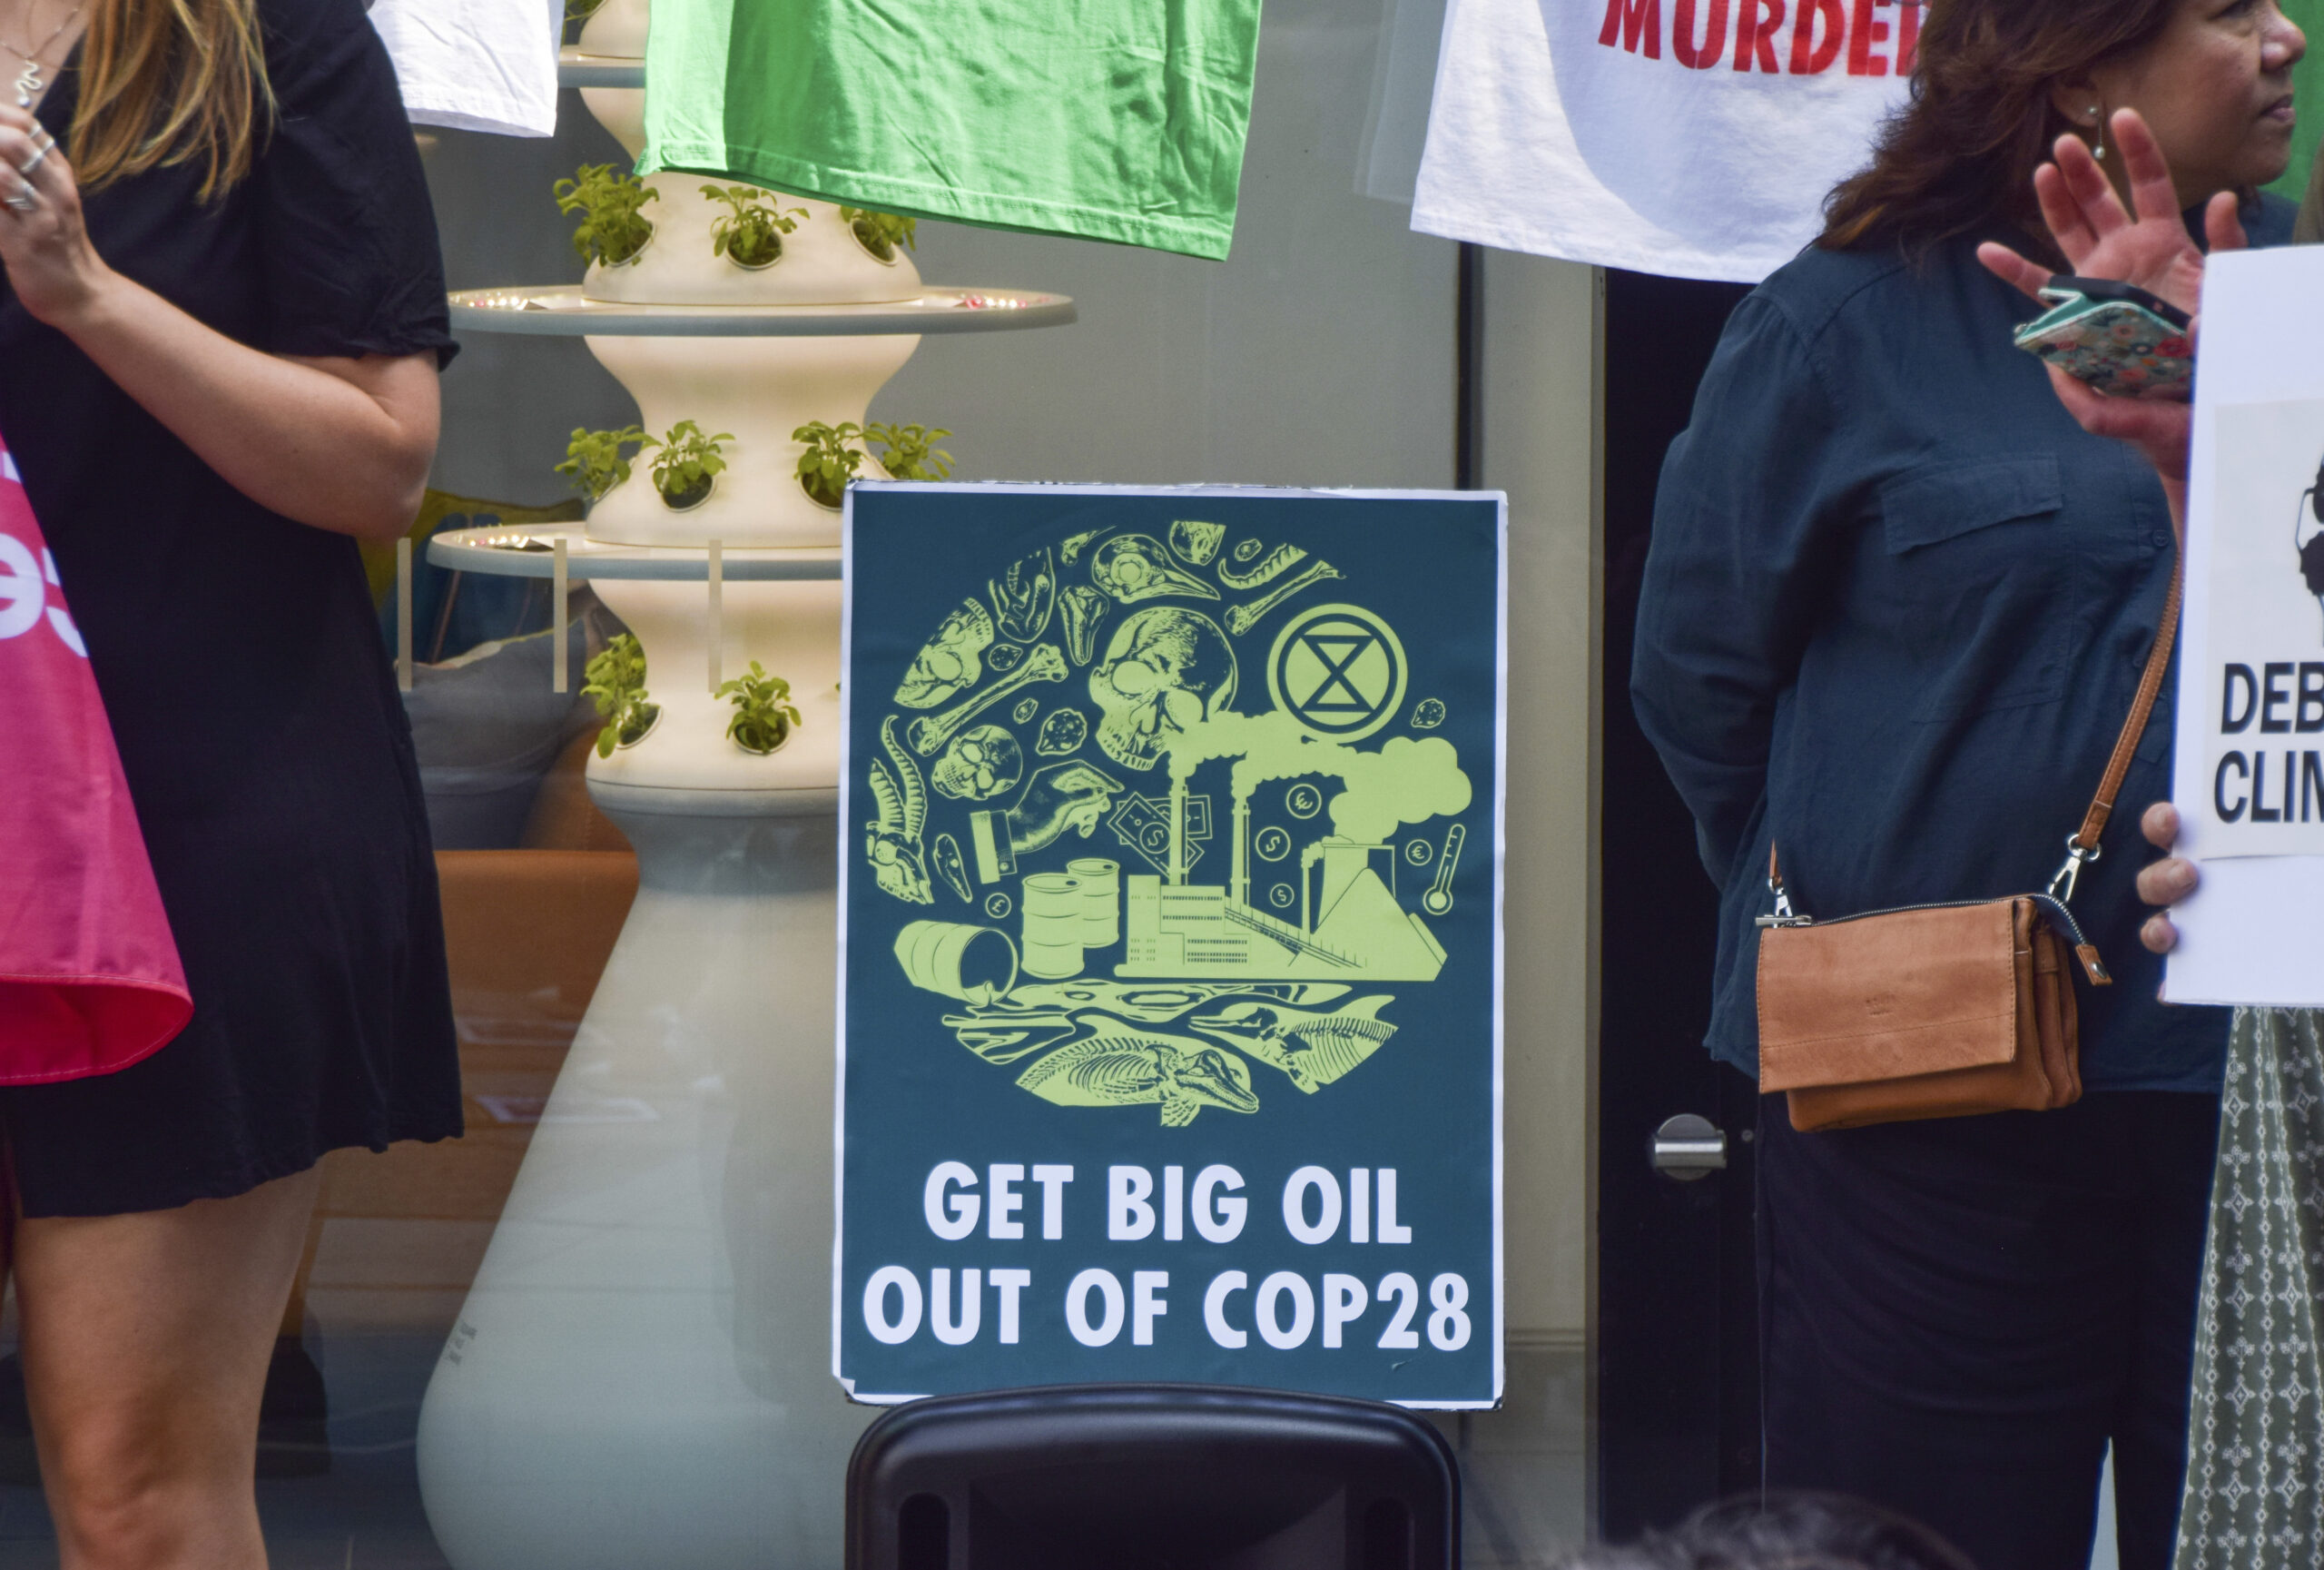 Protesters in London staged a demonstration against oil companies taking over COP 28, in support of climate justice, and in protest against fossil fuel financing